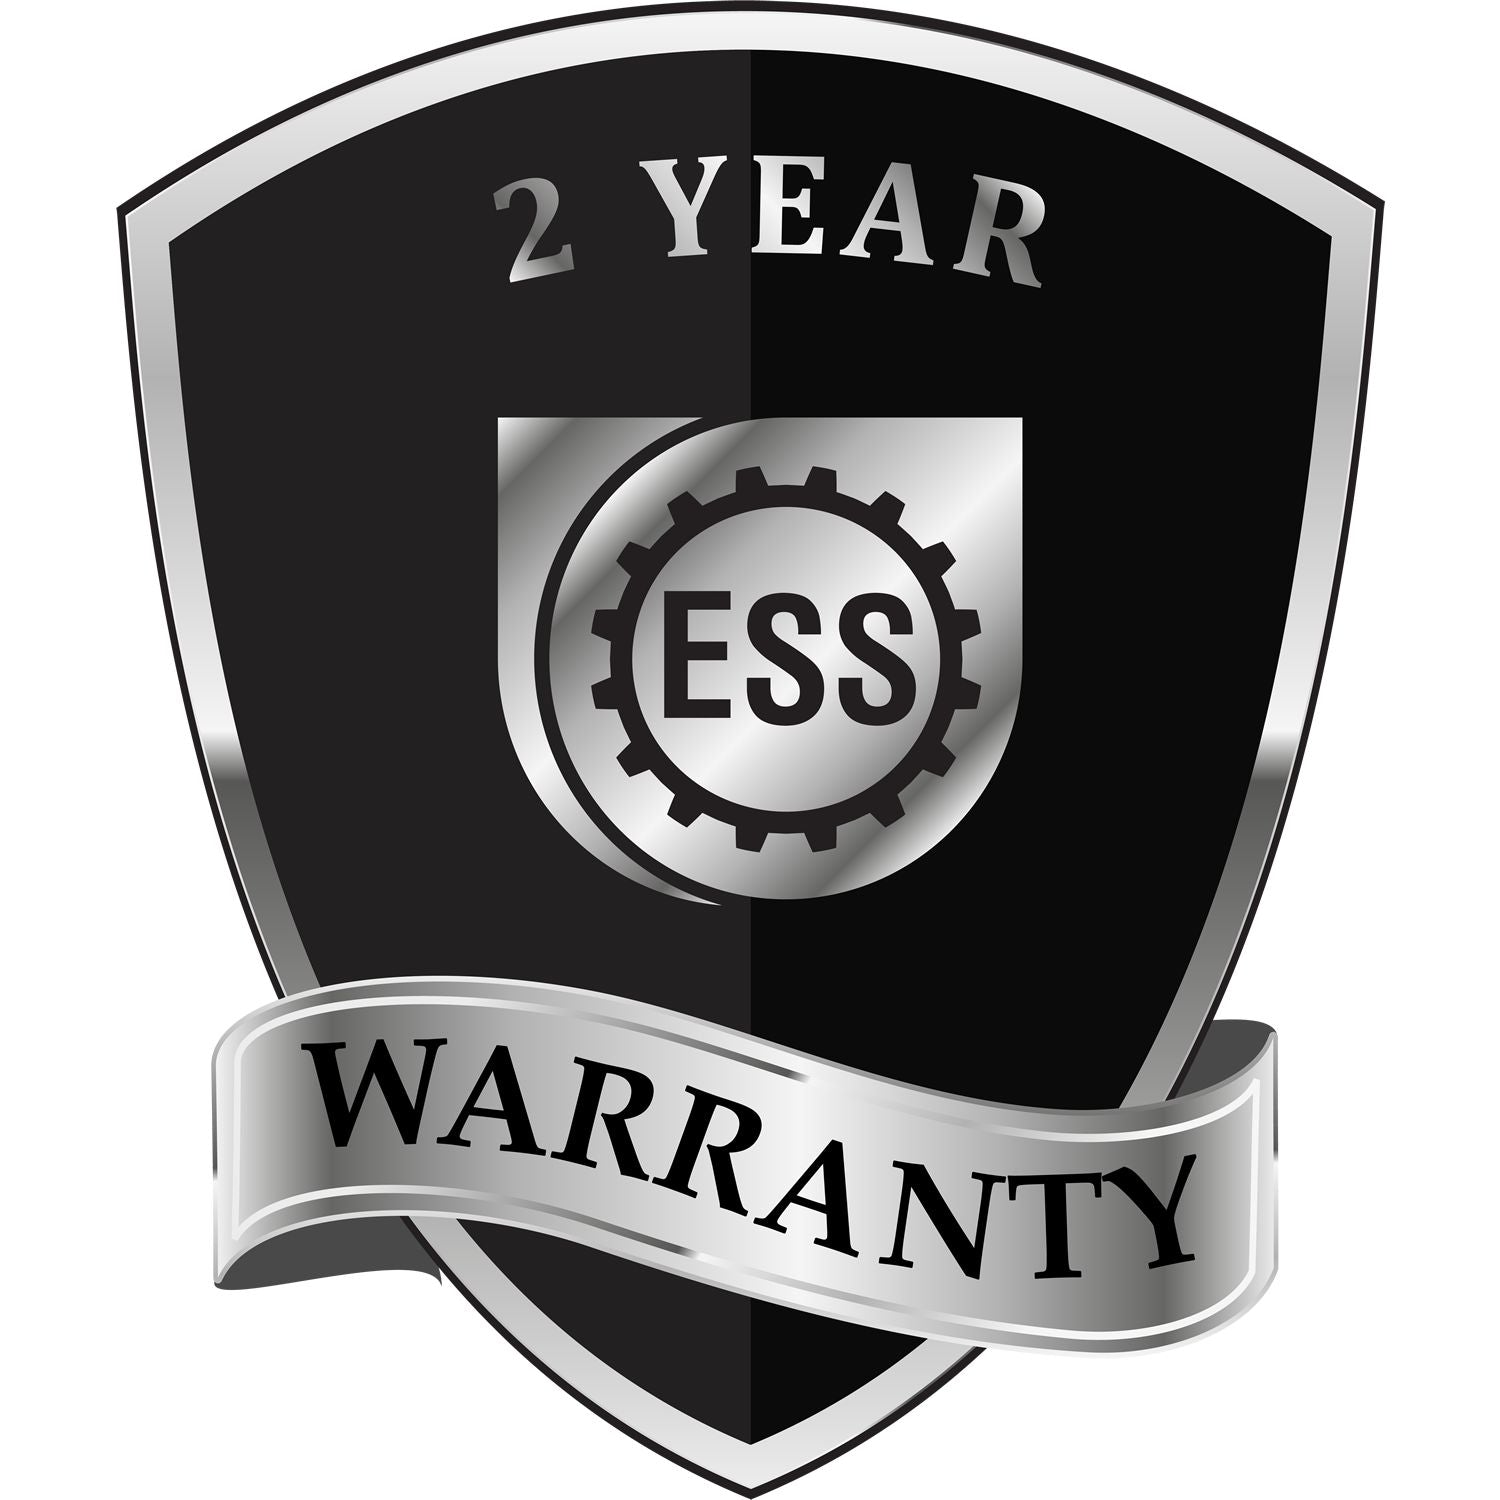 A badge or emblem showing a warranty icon for the Heavy Duty Cast Iron New Mexico Land Surveyor Seal Embosser